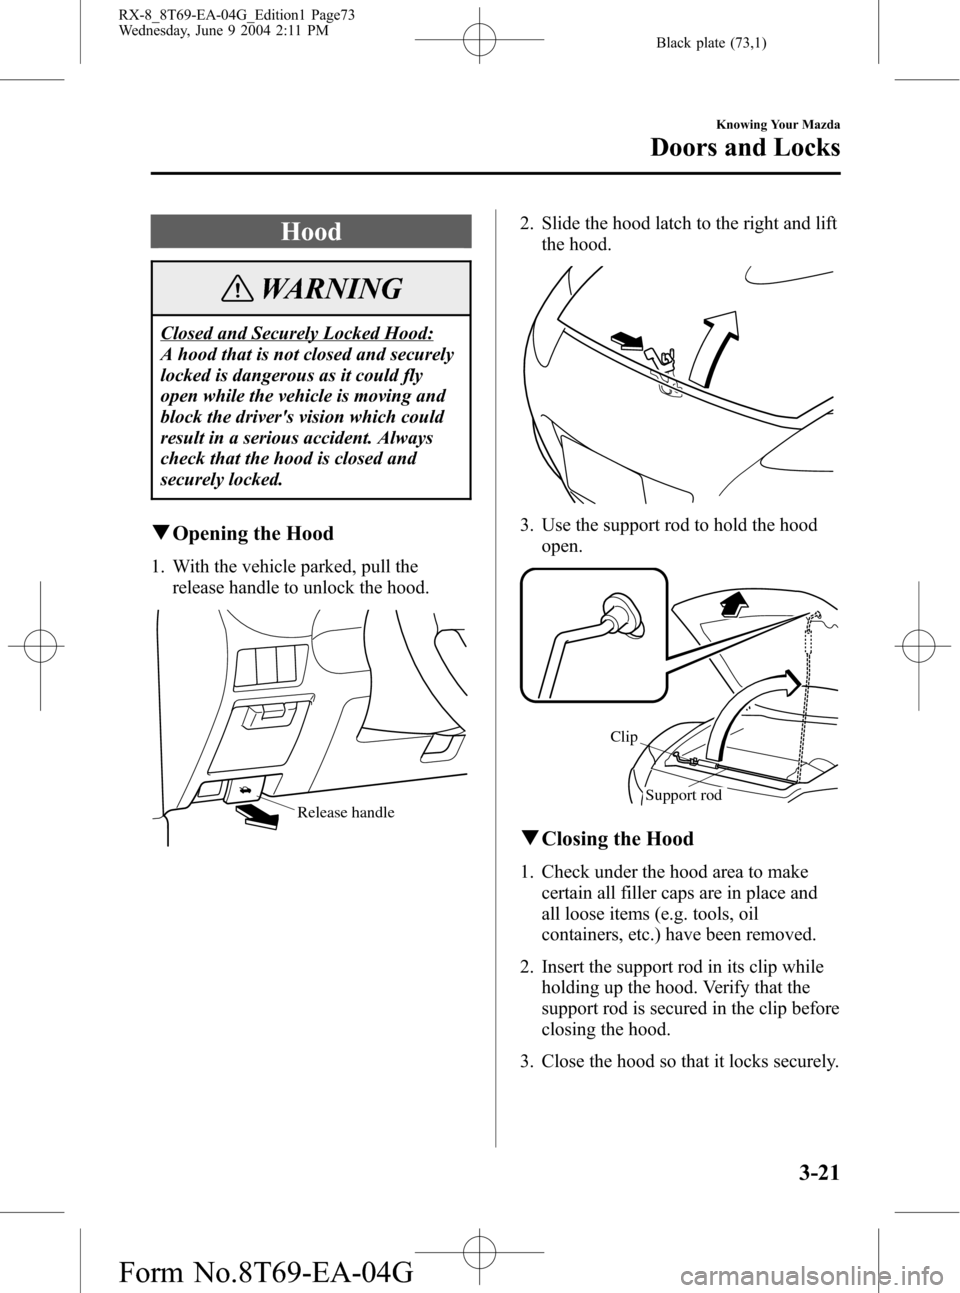 MAZDA MODEL RX 8 2005  Owners Manual (in English) Black plate (73,1)
Hood
WARNING
Closed and Securely Locked Hood:
A hood that is not closed and securely
locked is dangerous as it could fly
open while the vehicle is moving and
block the drivers visi